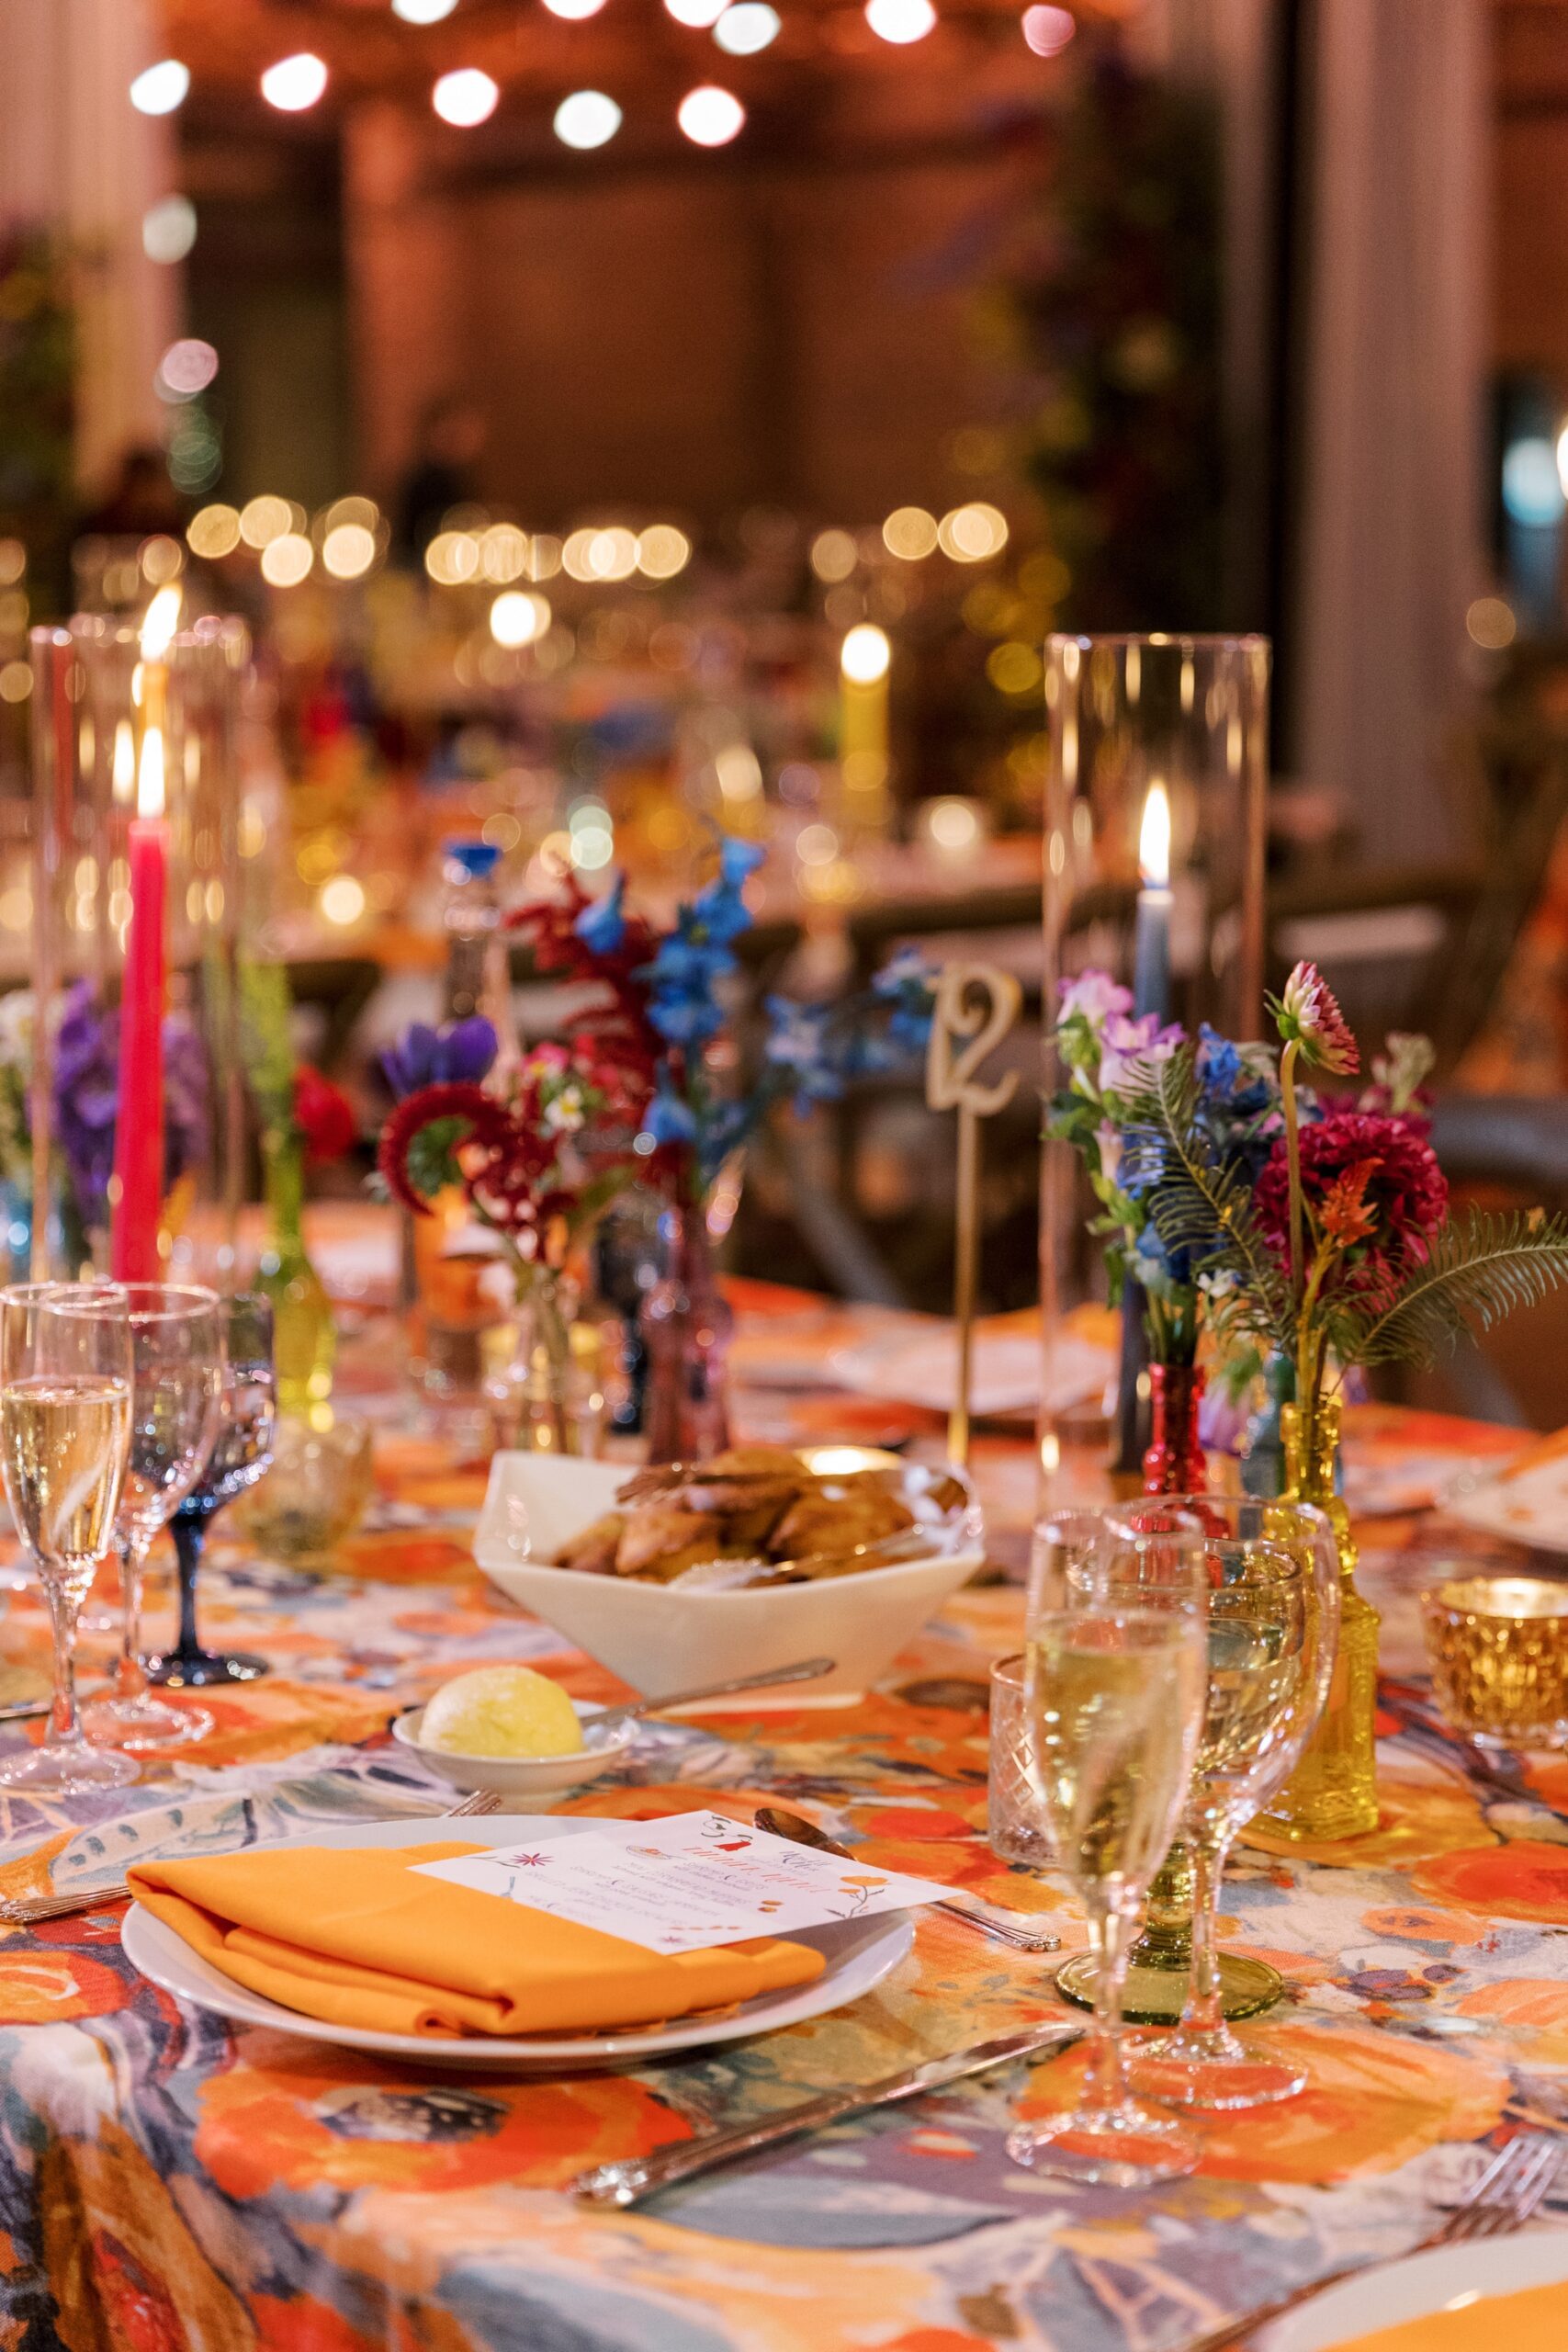 The colorful wedding table settings fit the colorful wedding palette